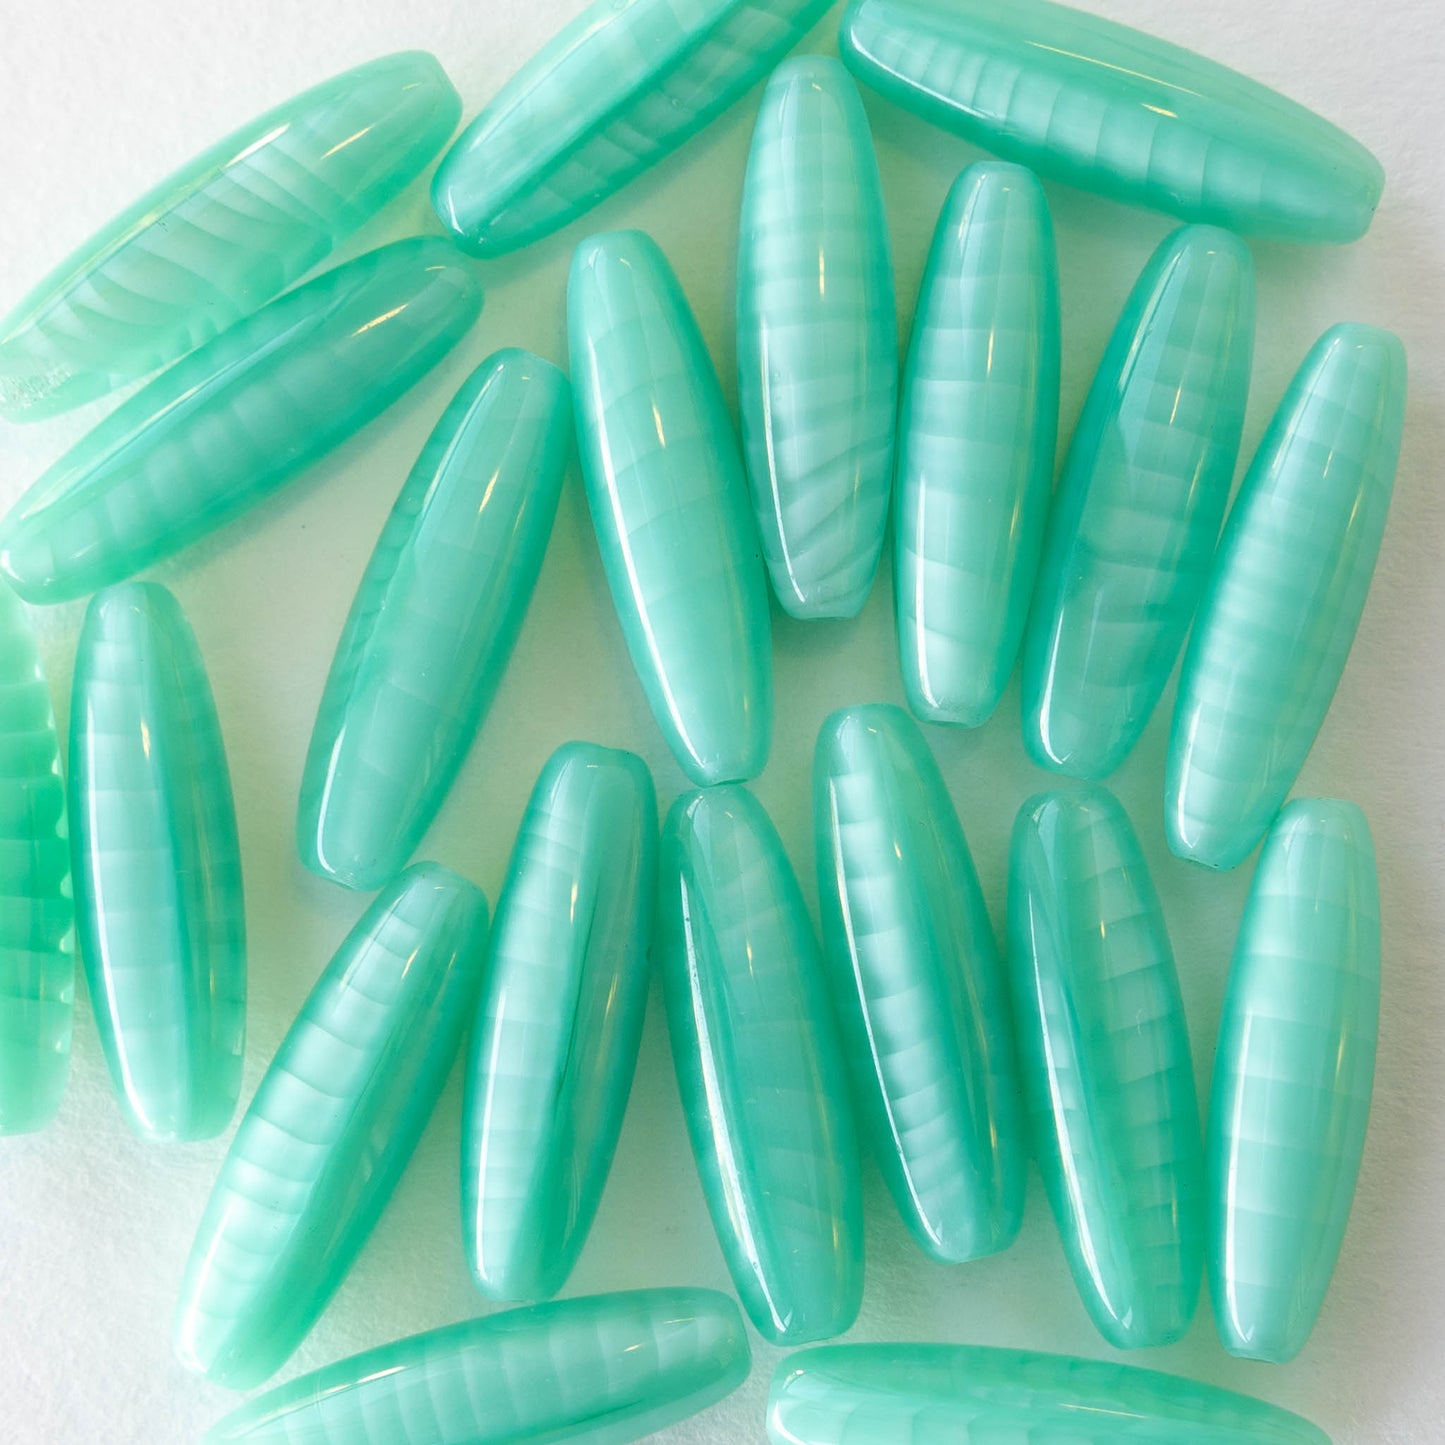 Load image into Gallery viewer, Tapered Tube Beads - Seafoam Green - Choose Size
